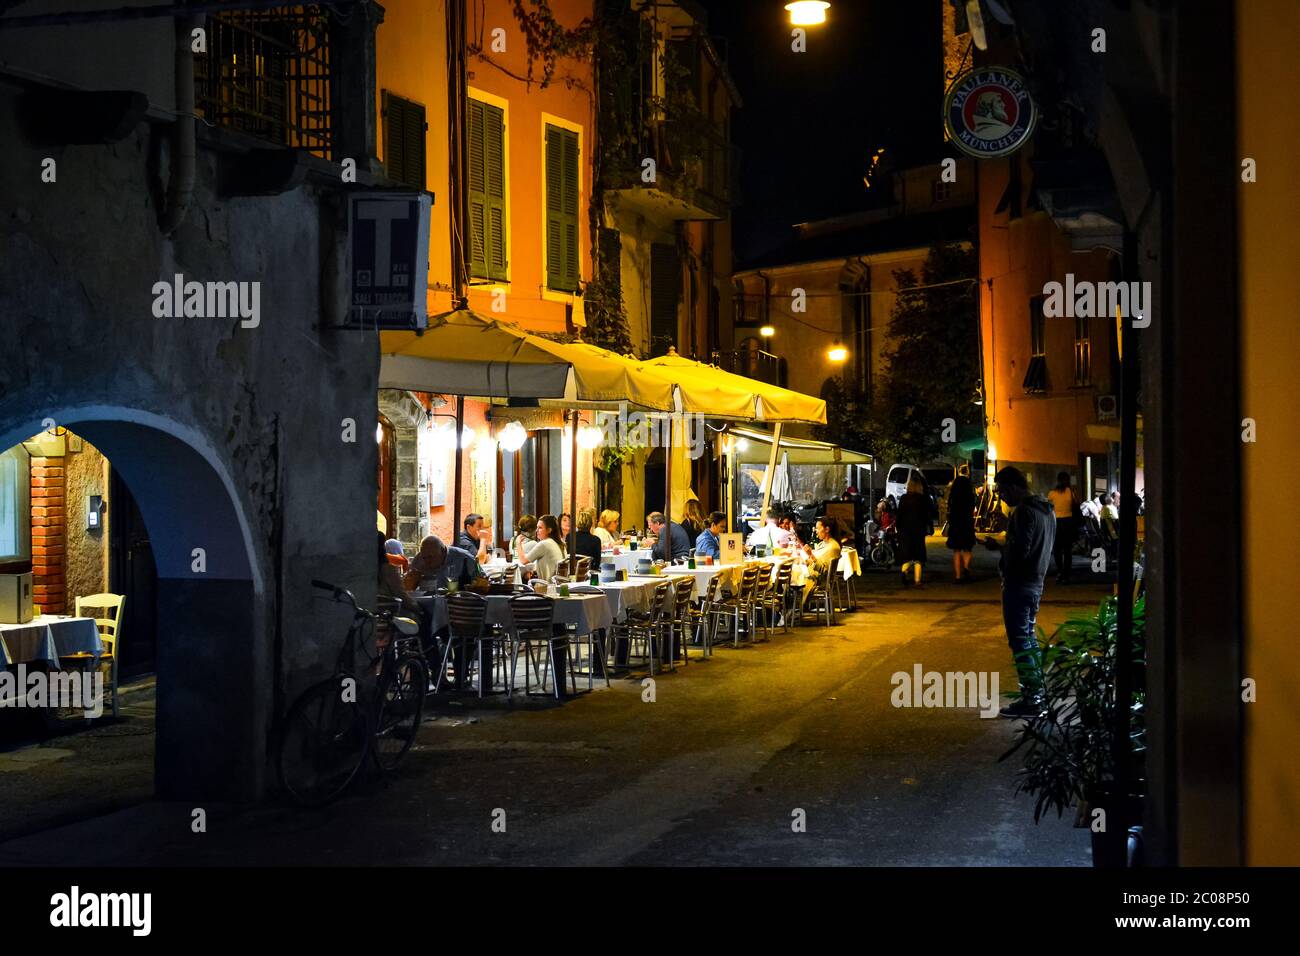 Late night in the village of Monterosso Al Mare, part of the Cinque Terre in Italy on the Italian Riviera as tourists enjoy an evening sidewalk cafe Stock Photo